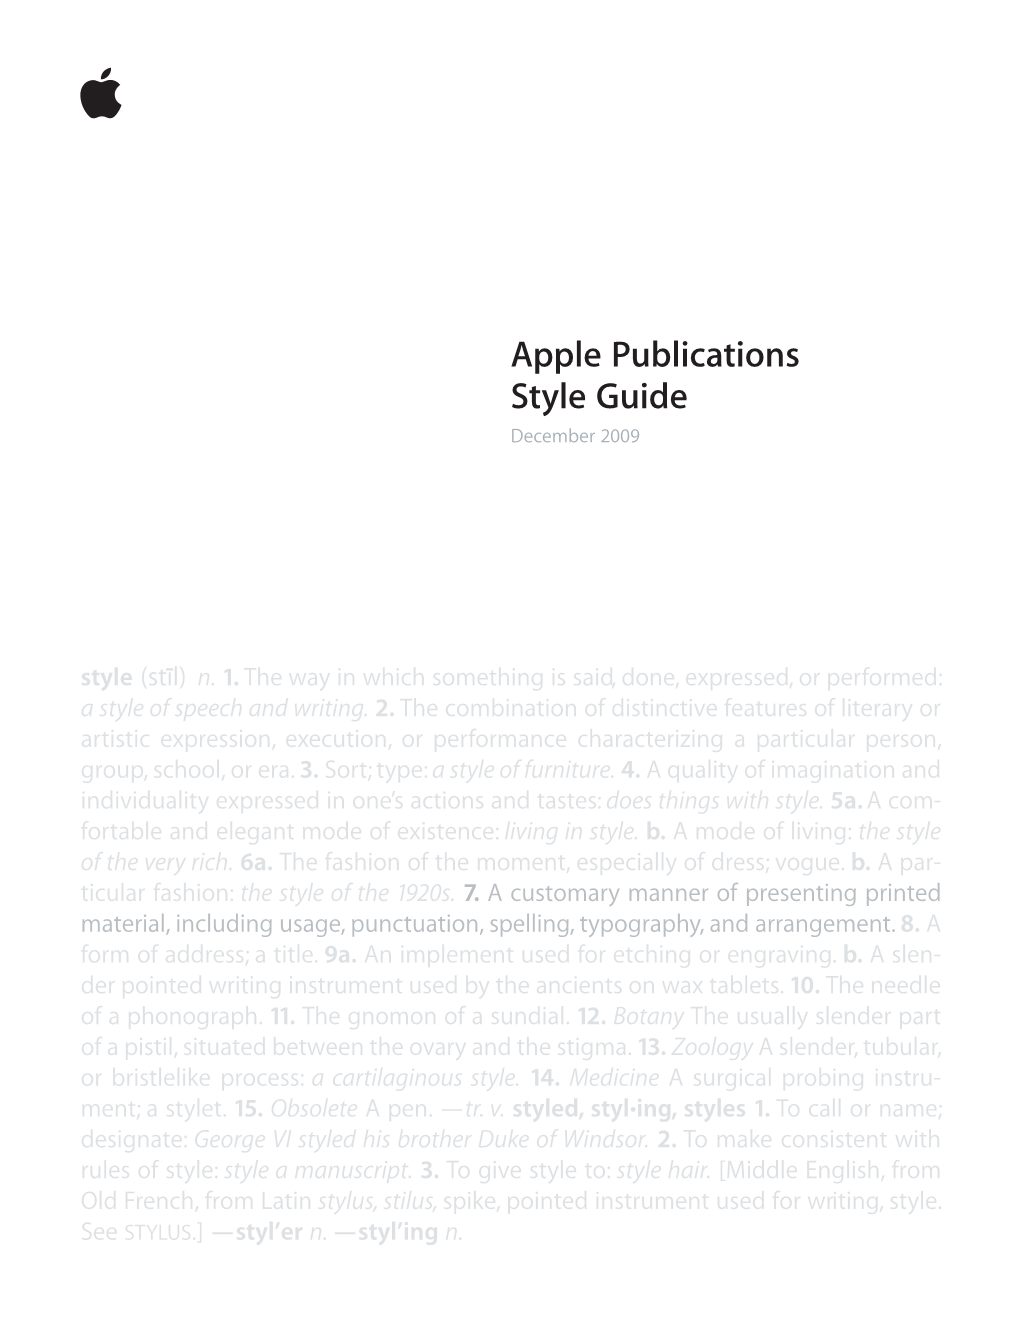 Apple Publications Style Guide December 2009